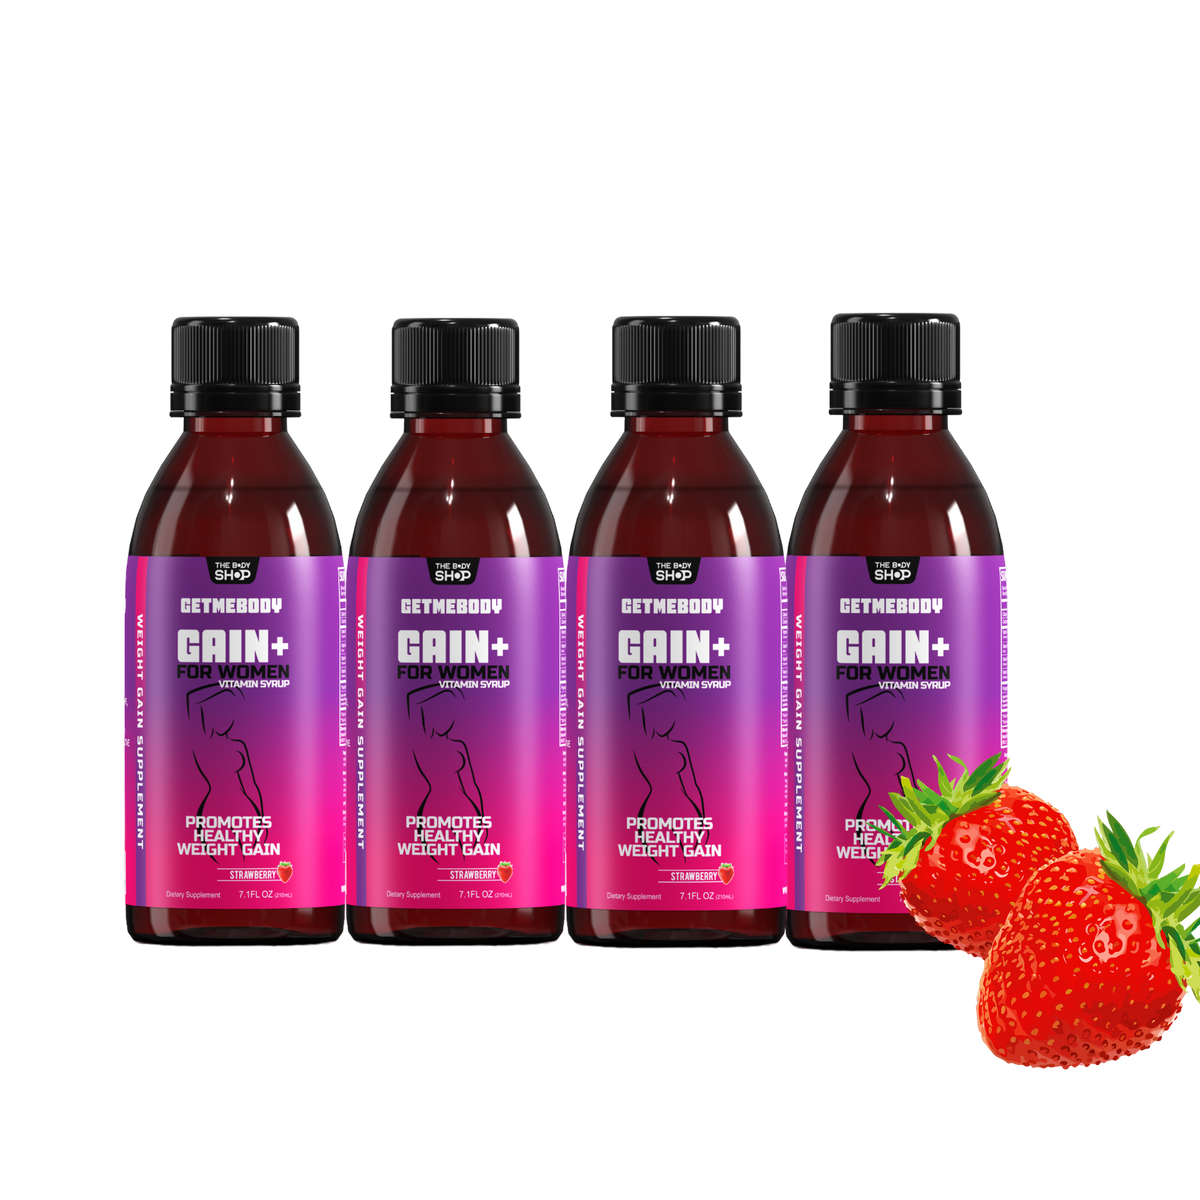 BLACK FRIDAY BUNDLE & SAVE STRAWBERRY GETMEBODY Gain+ for WOMEN(Month Supply)